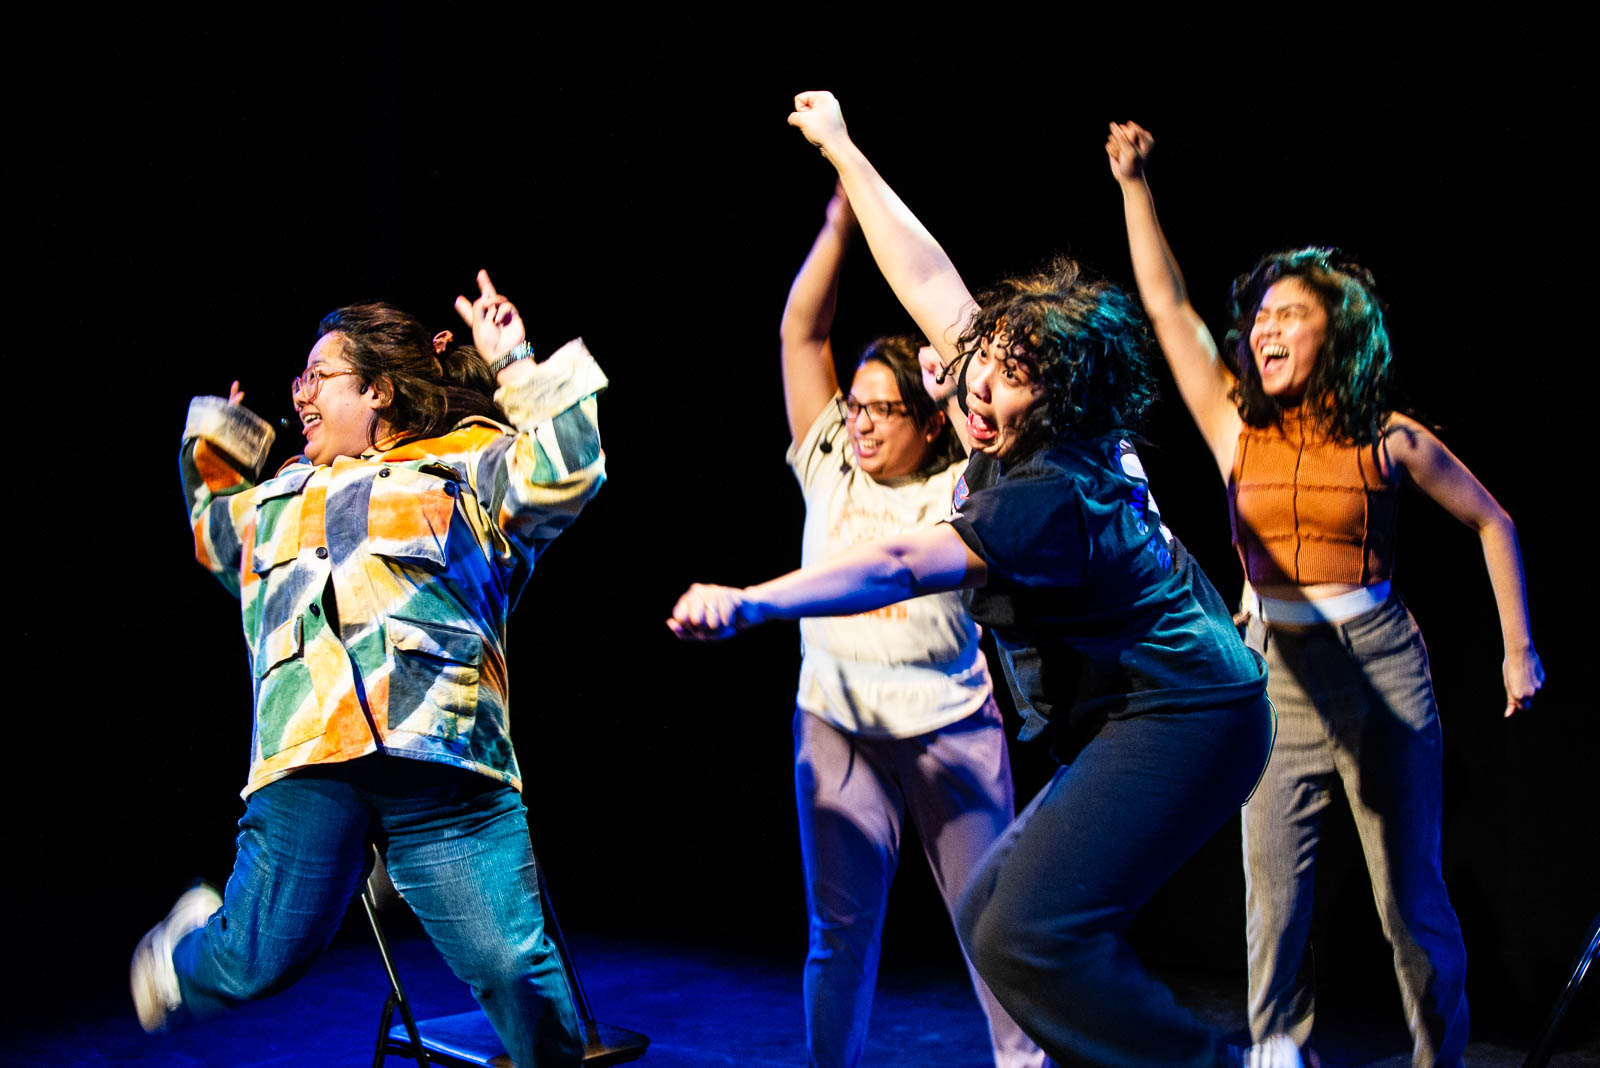 The cast of Tita Jokes, a Tita Collective Production, perform in the Ottawa Fringe. The four performers wear bright colours and stand on stage with their arms raised as if in triumph.